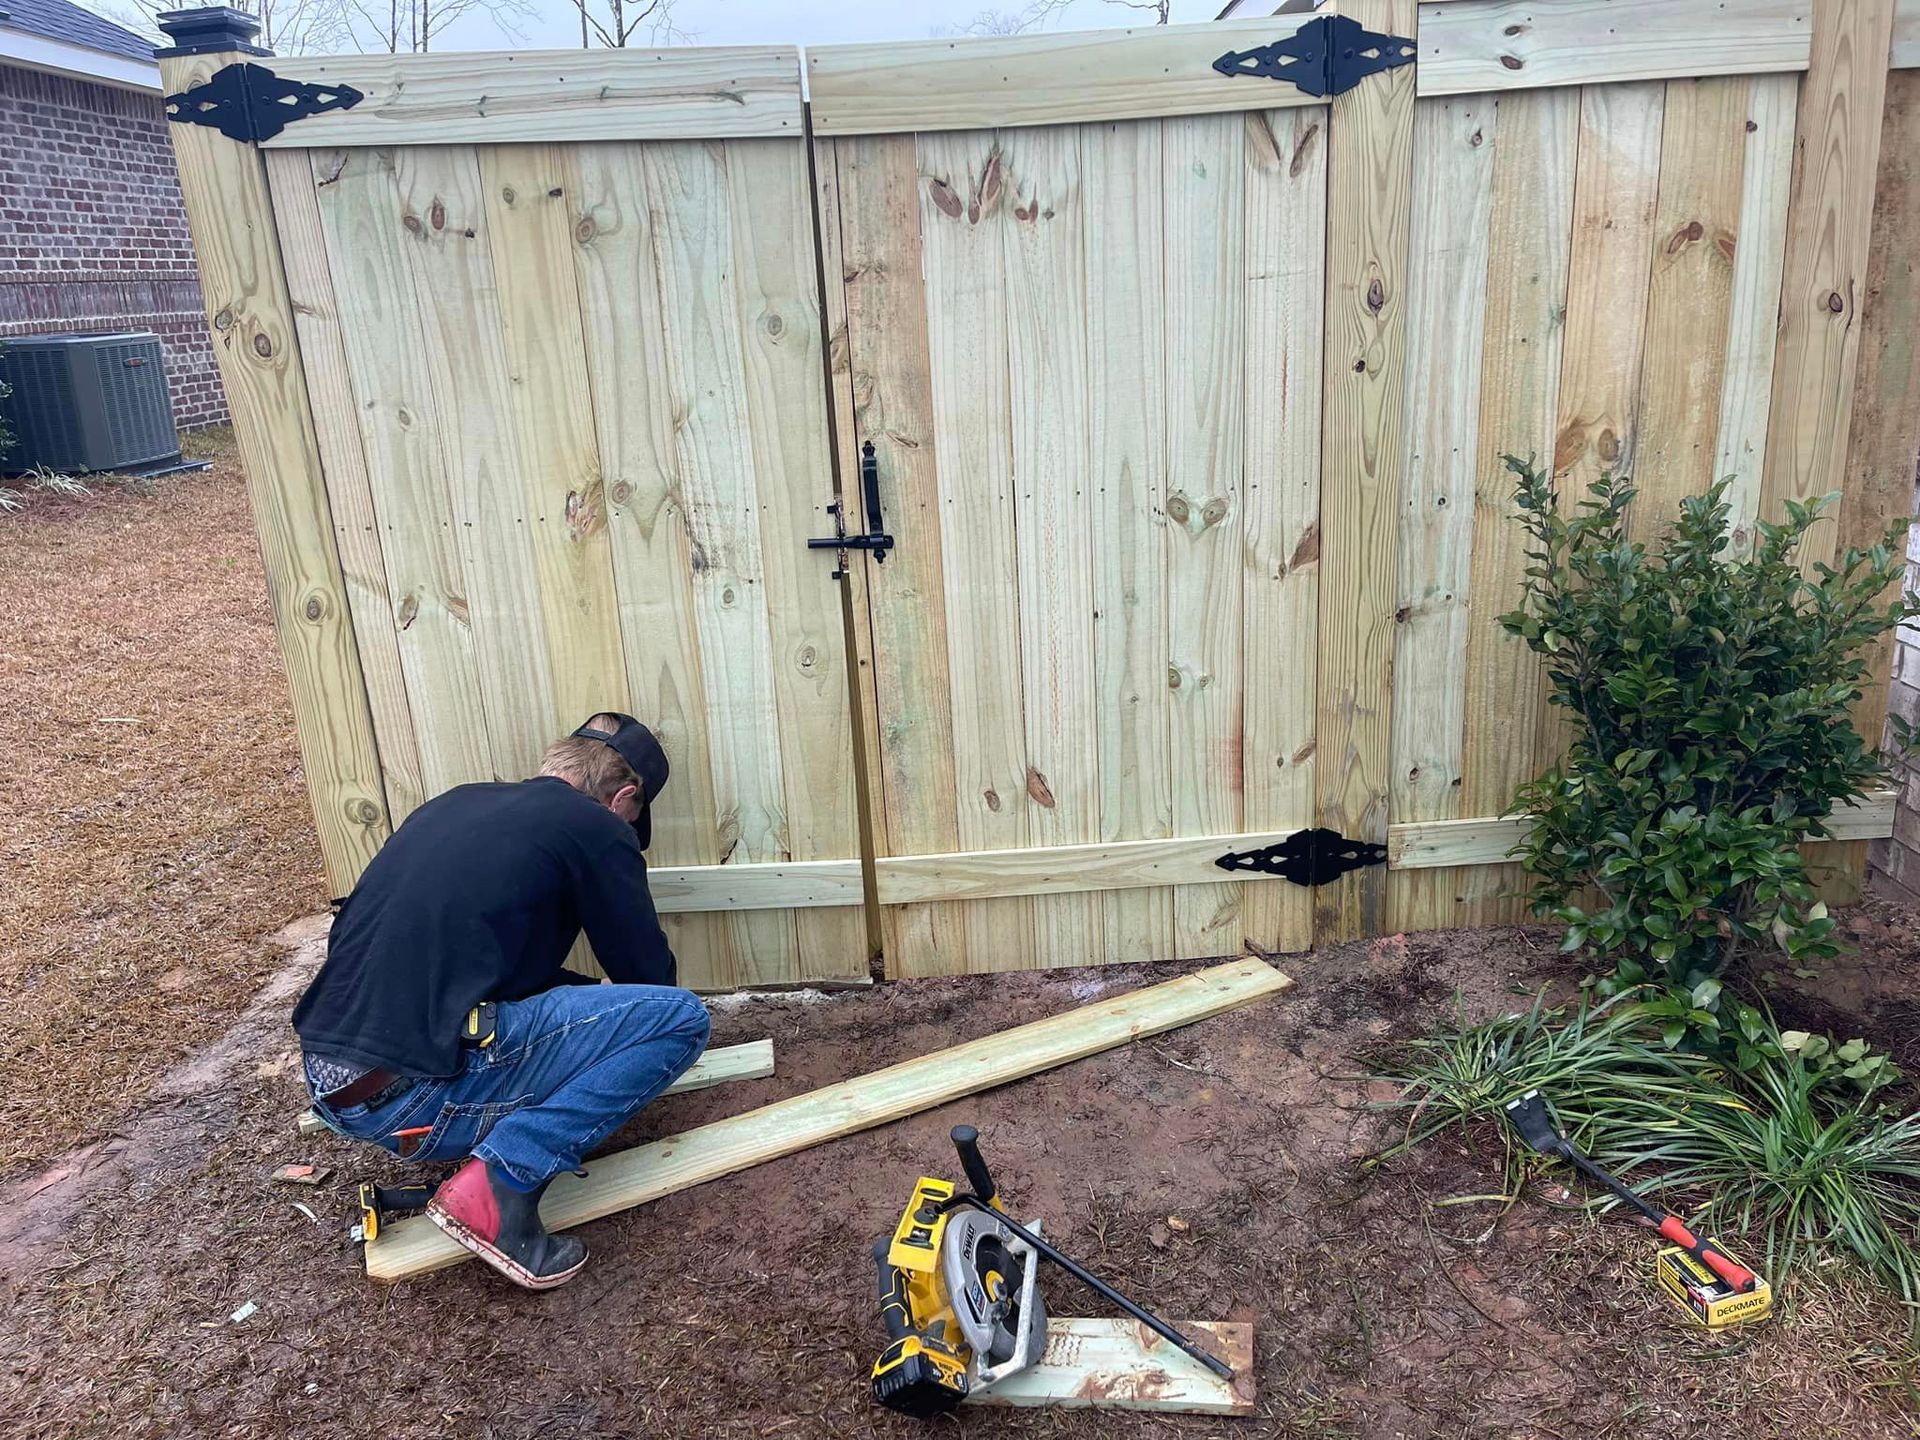 A Man Is Working on A Wooden Fence with A Circular Saw - Mississippi, United States - Magnolia Fencing, LLC